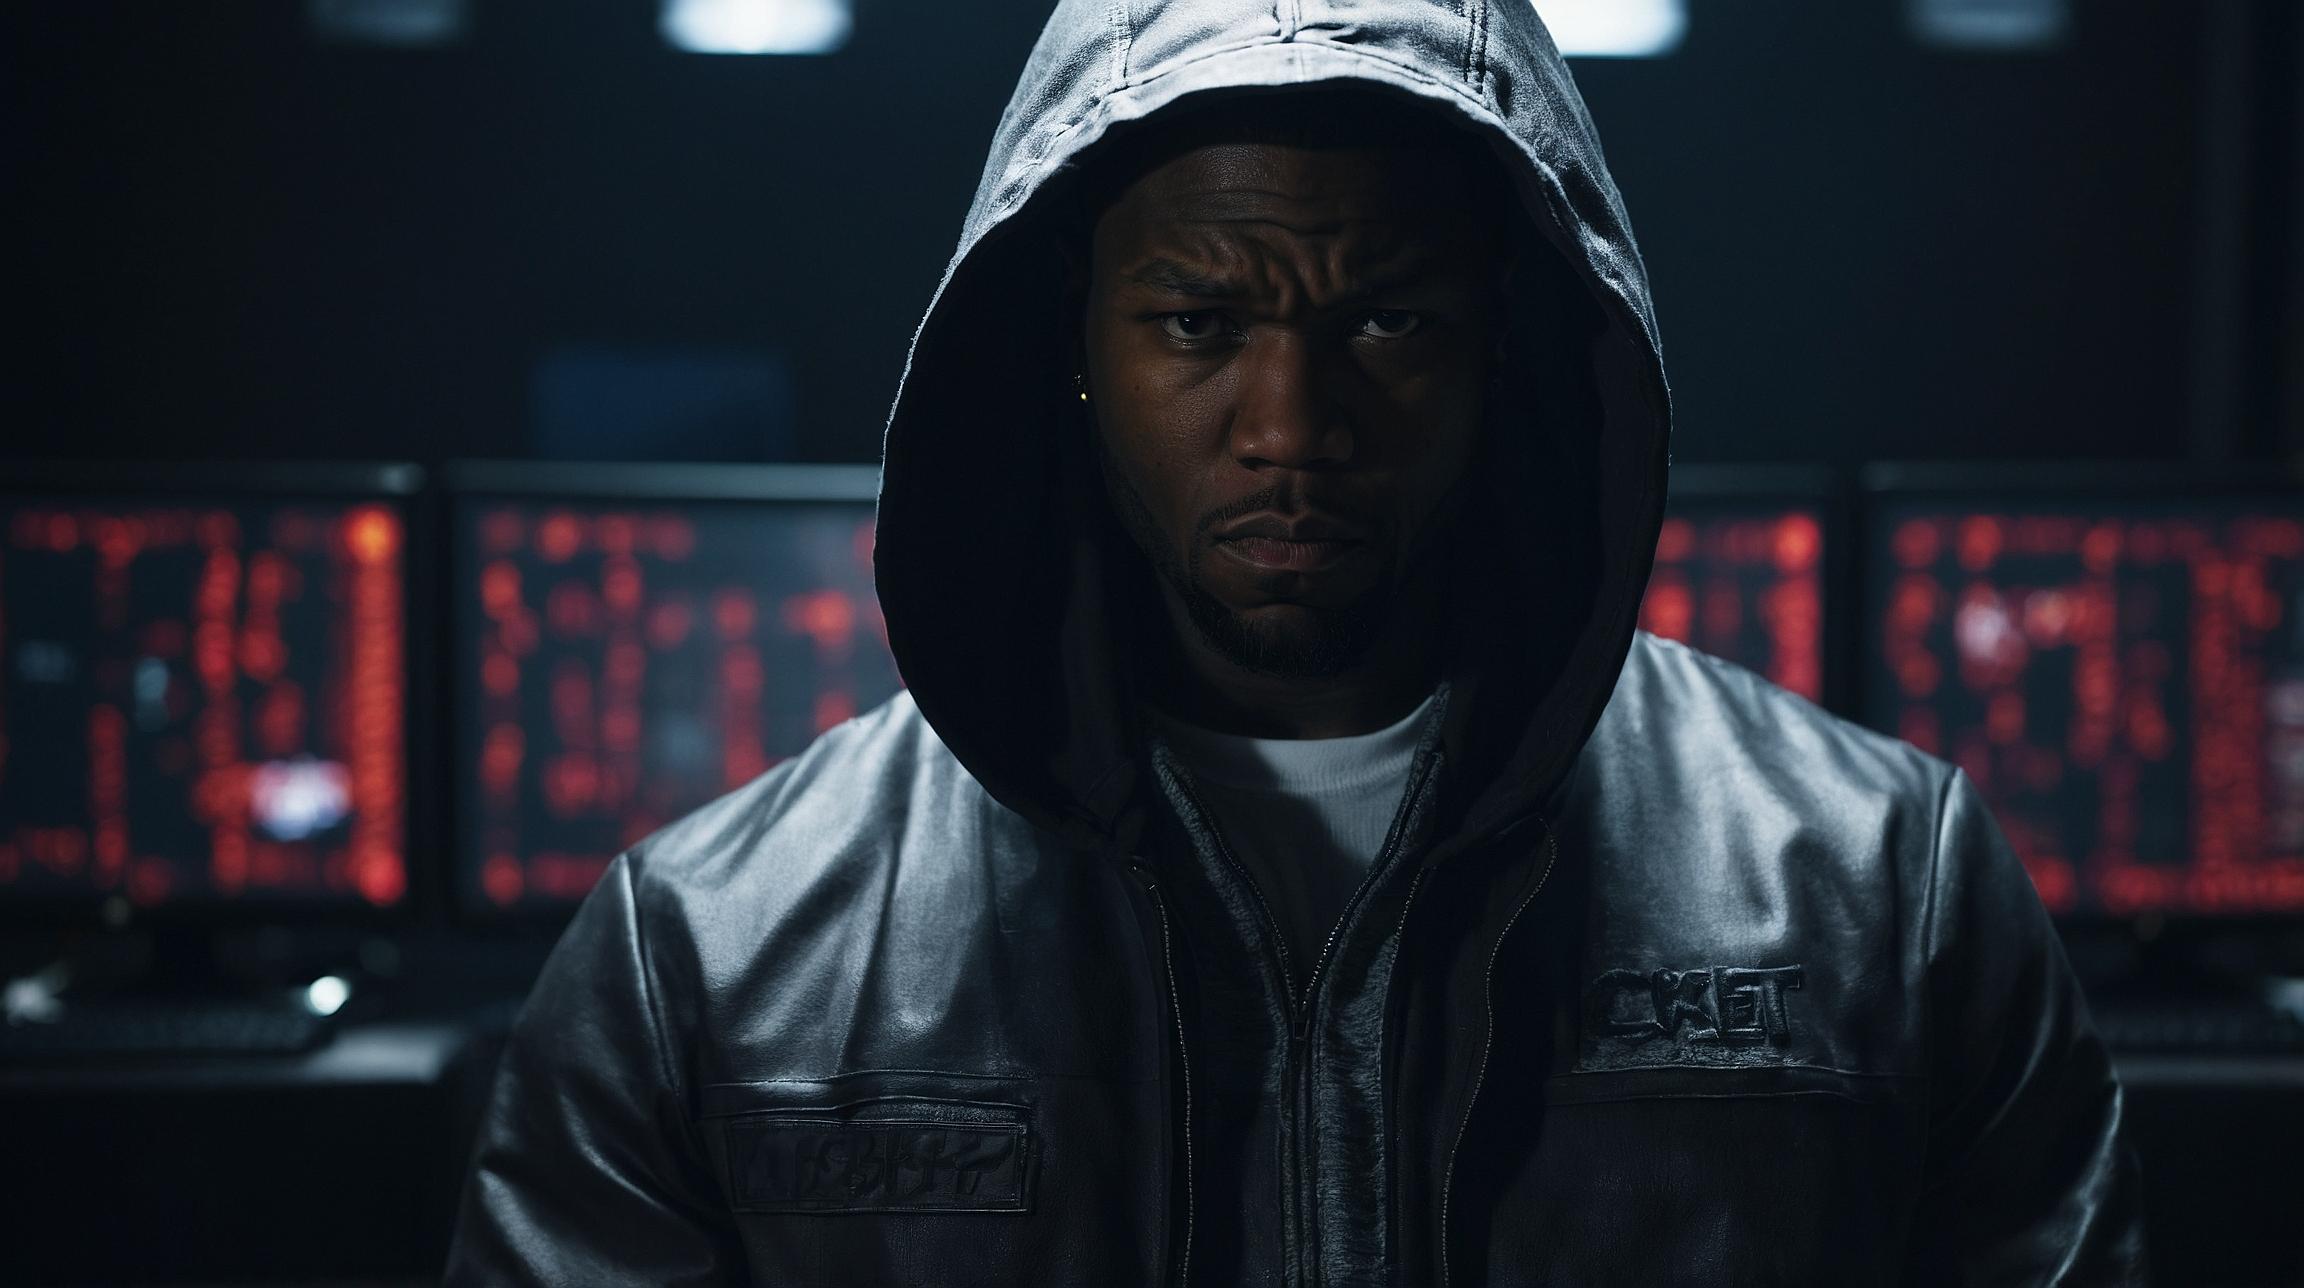 50 Cent's Account Hacked to Promote Memecoins – Stay Vigilant | FinOracle